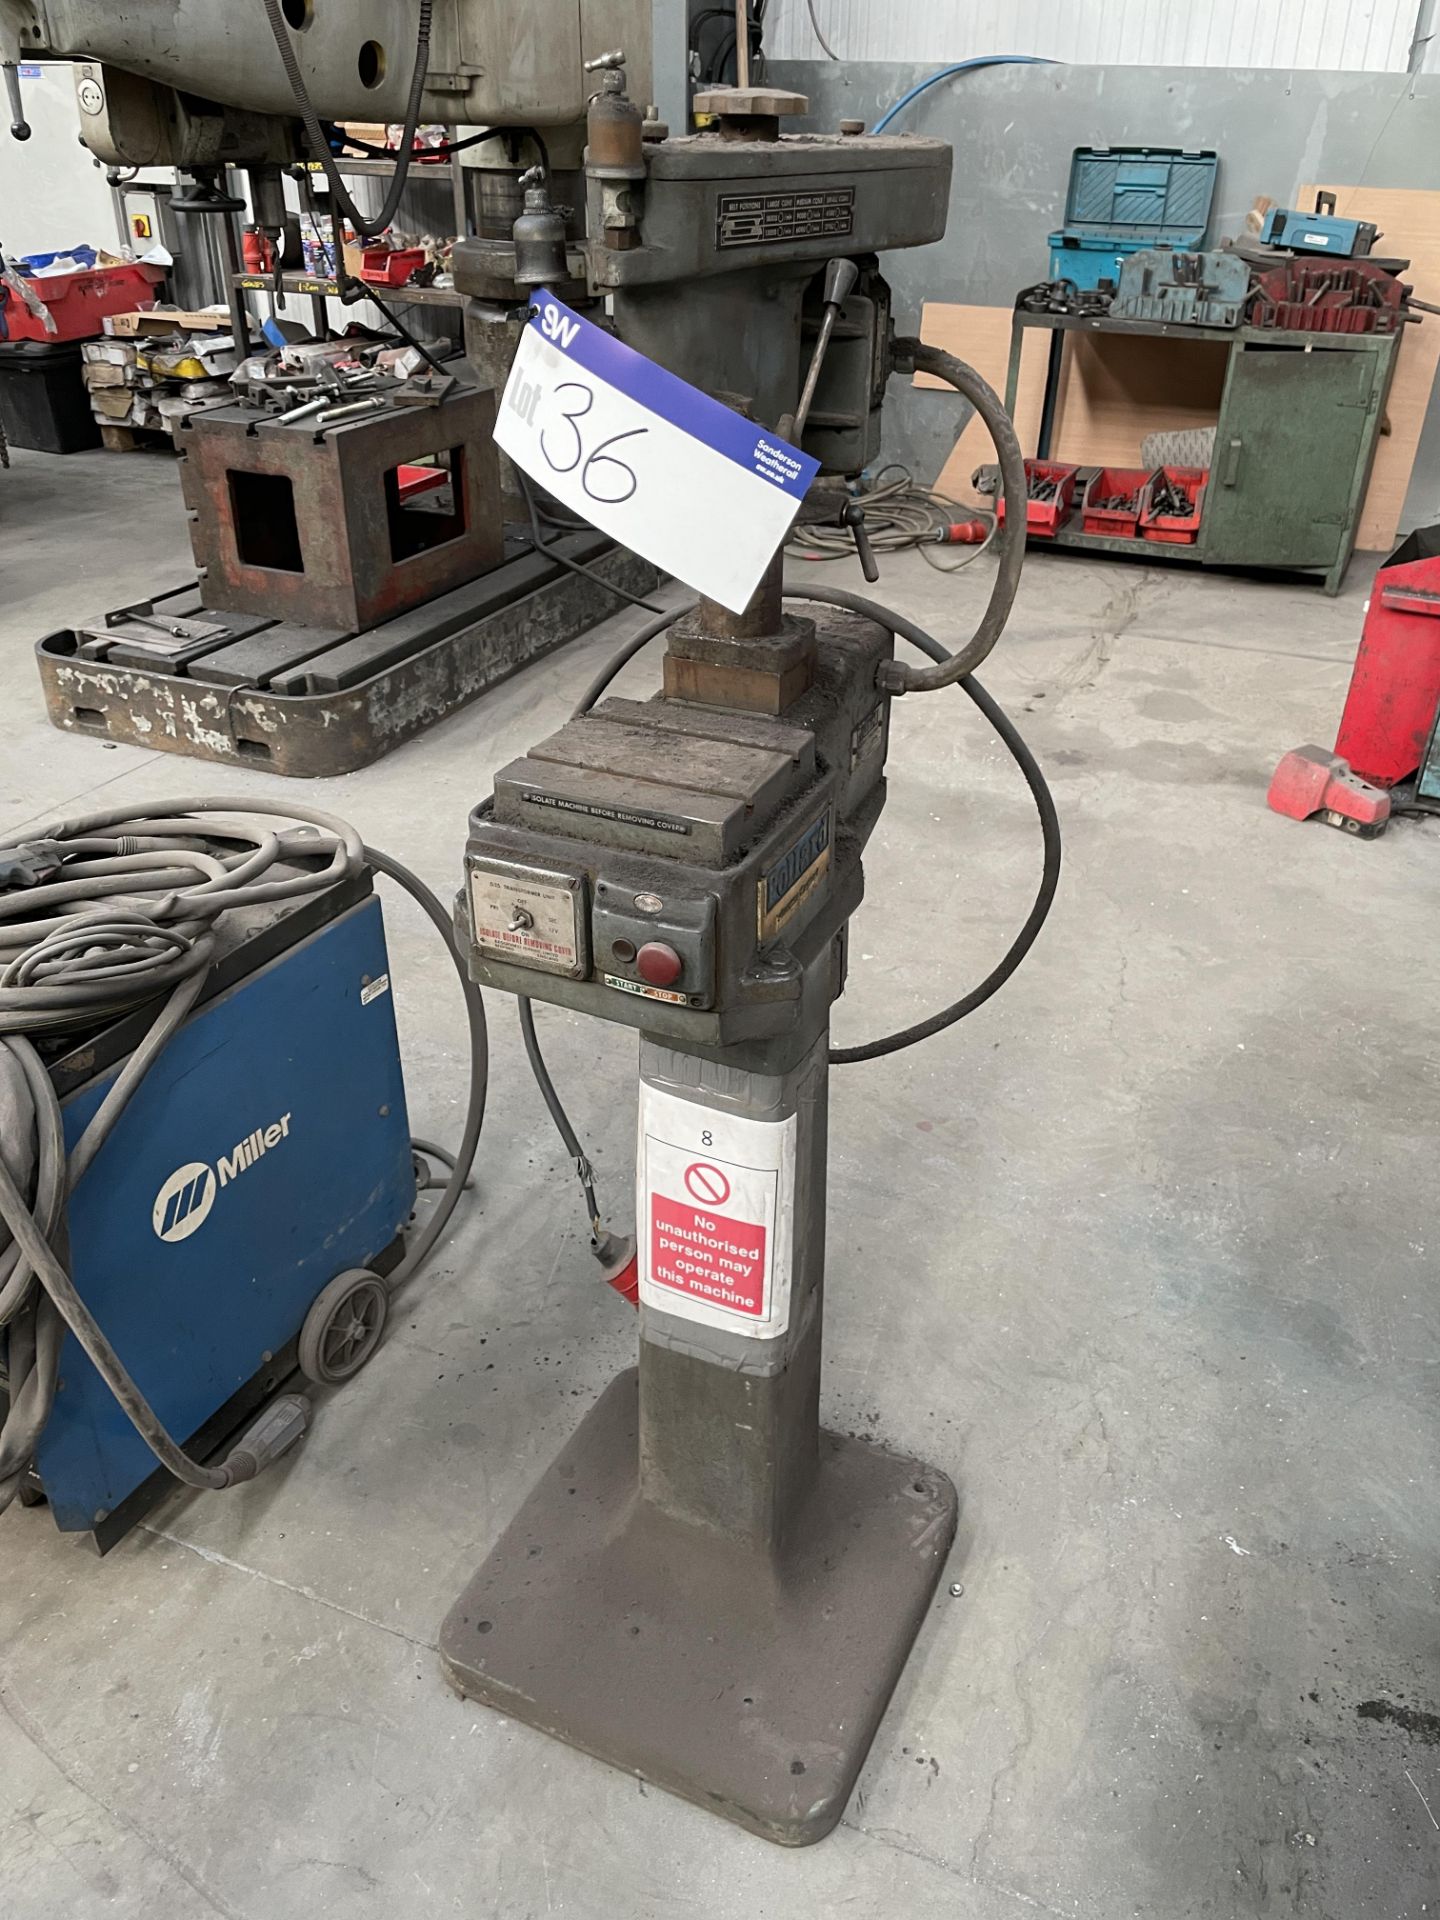 Pollards 9FXP Drilling Unit, serial no. 30303H, with T-slotted table, 180mm x 180mm, lot located